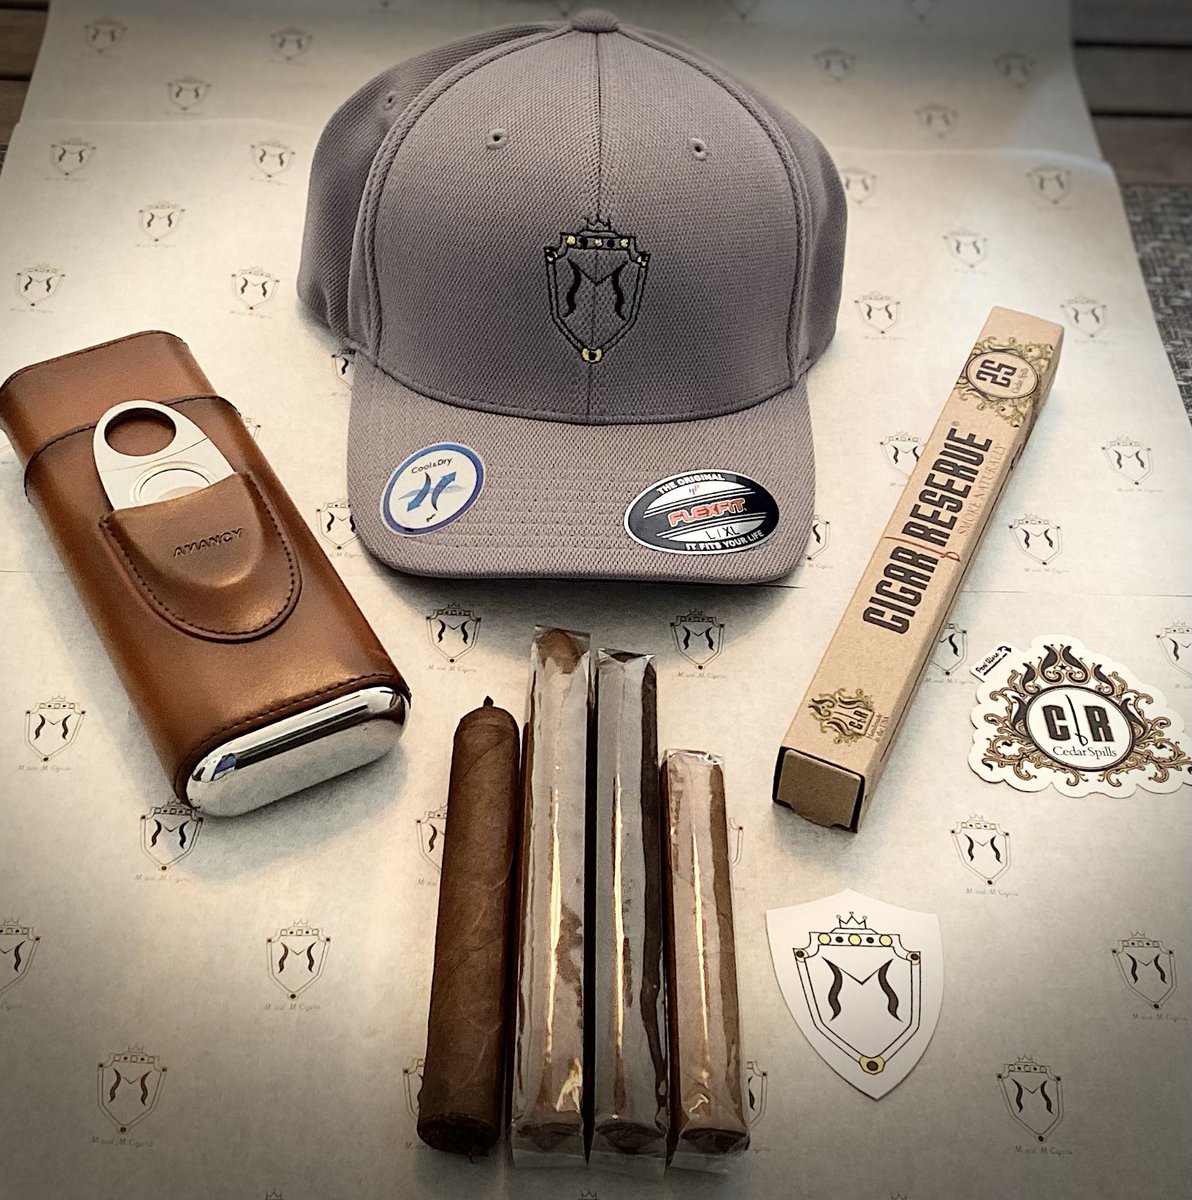 Next Giveaway!

(1) @mandmcigarco embroidered Flex Fit hat
(1) 3-cigar leather travel case with straight cutter
(1) 25-pack @CigarReserve Spanish cedar spills
(1) Private Reserve - Montevideo
(1) Everyday - Connecticut
(1) Everyday - Habano
(1) Everyday - Maduro
Assorted stickers